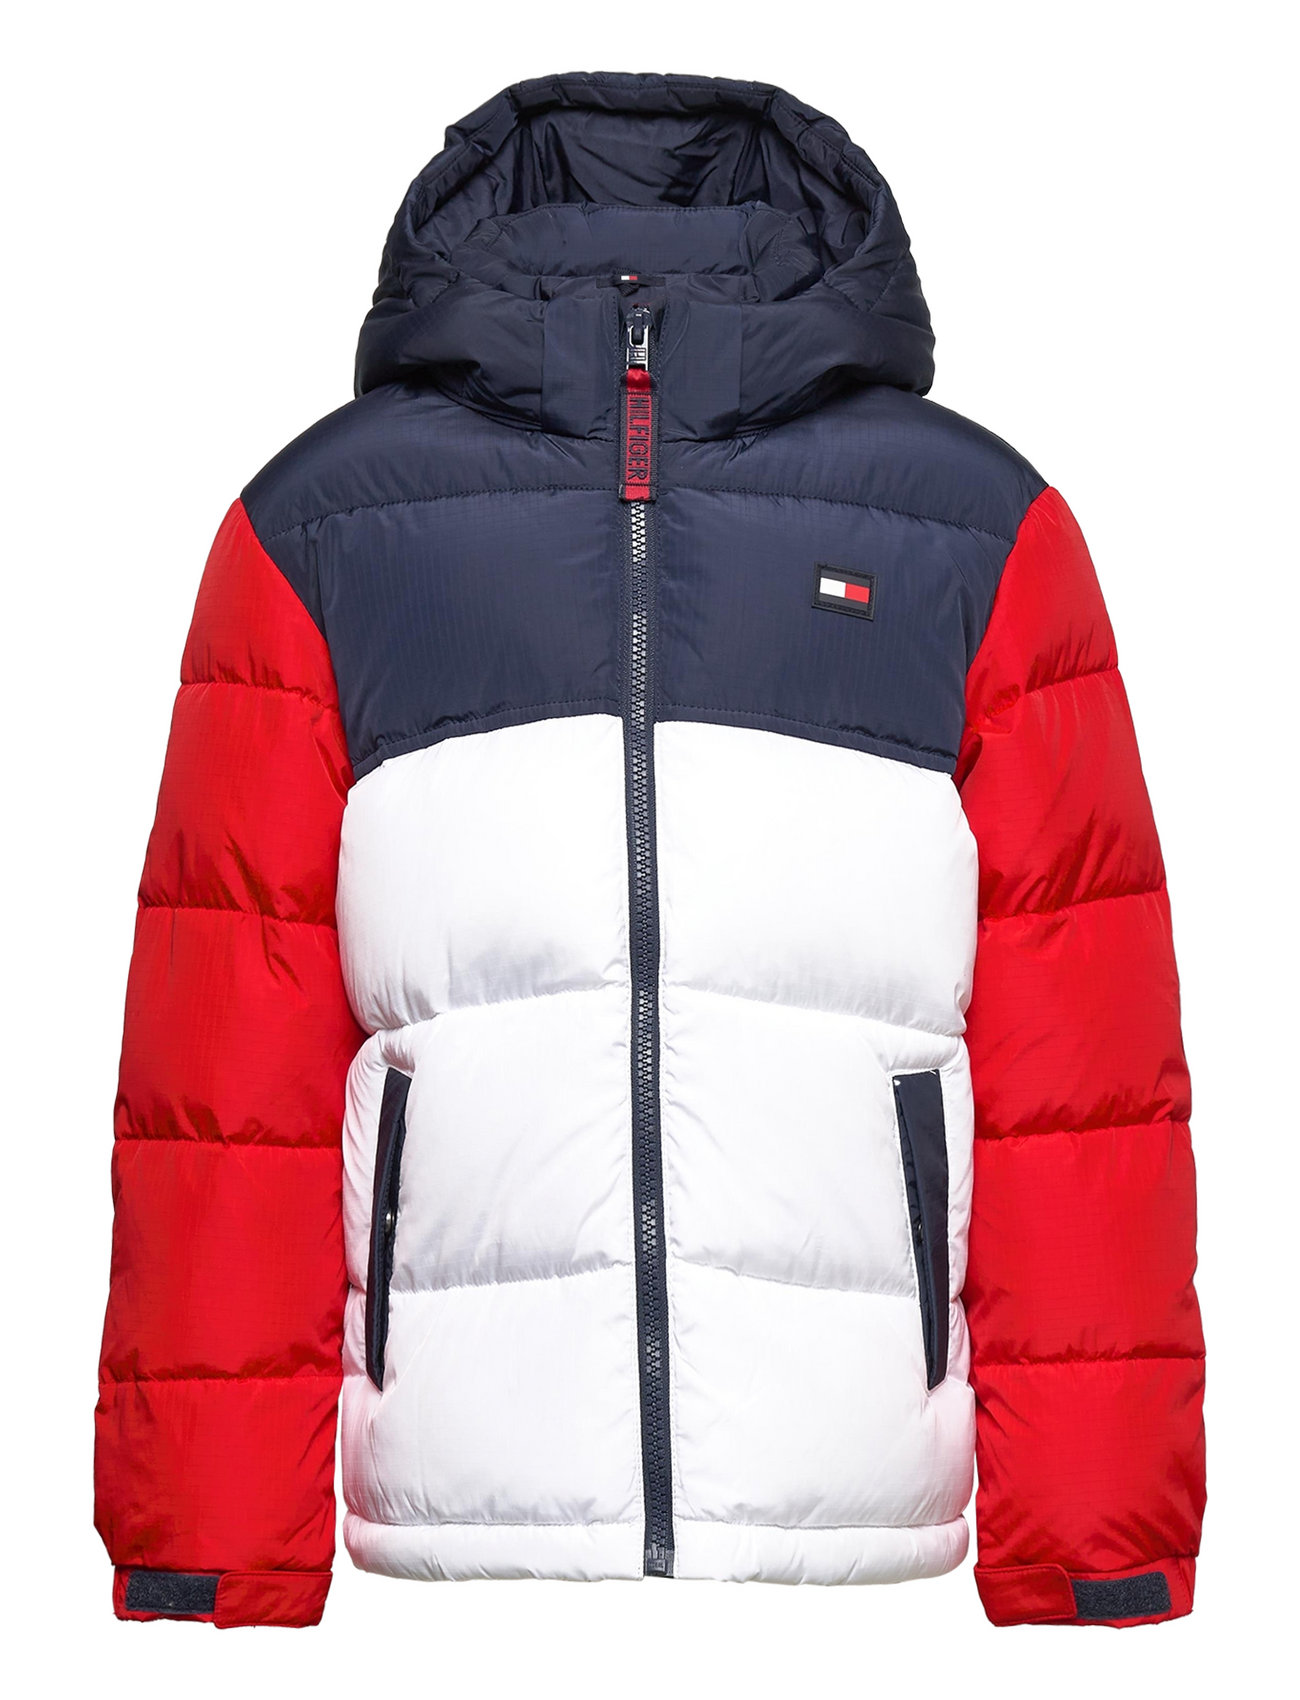 Tommy Hilfiger Alaska Puffer Jacket - €. Buy Puffer & Padded from Tommy Hilfiger online at Boozt.com. Fast delivery and returns